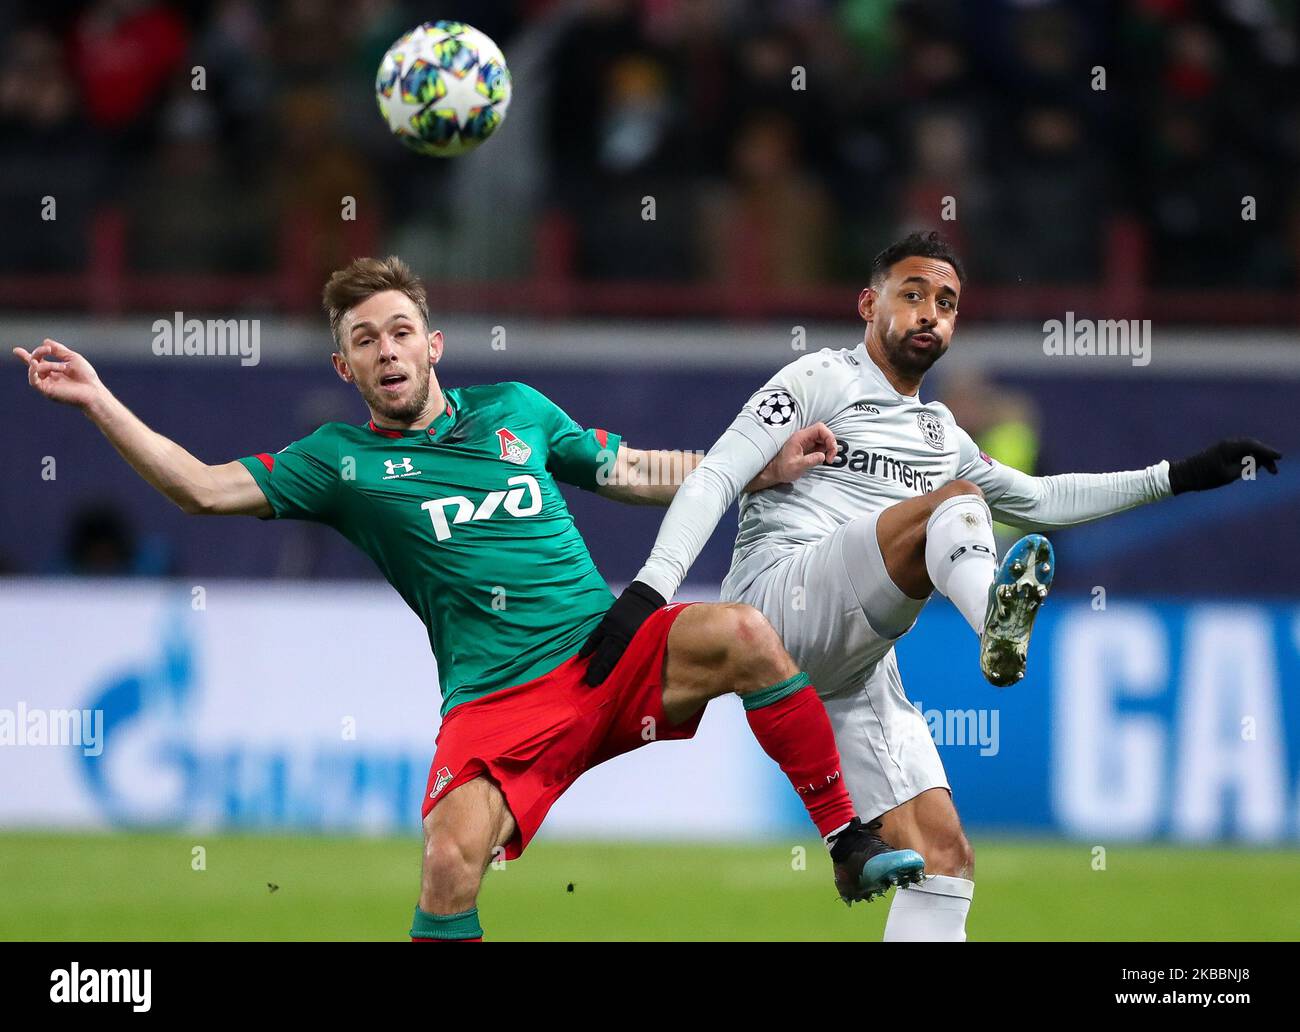 Maciej Rybus of FC Lokomotiv Moskva (L) and Karim Bellarabi of Bayer Leverkusen vie for the ball during the UEFA Champions League group D match between FC Lokomotiv Moskva and Bayer Leverkusen at RZD Arena on November 26, 2019 in Moscow, Russia. (Photo by Igor Russak/NurPhoto) Stock Photo